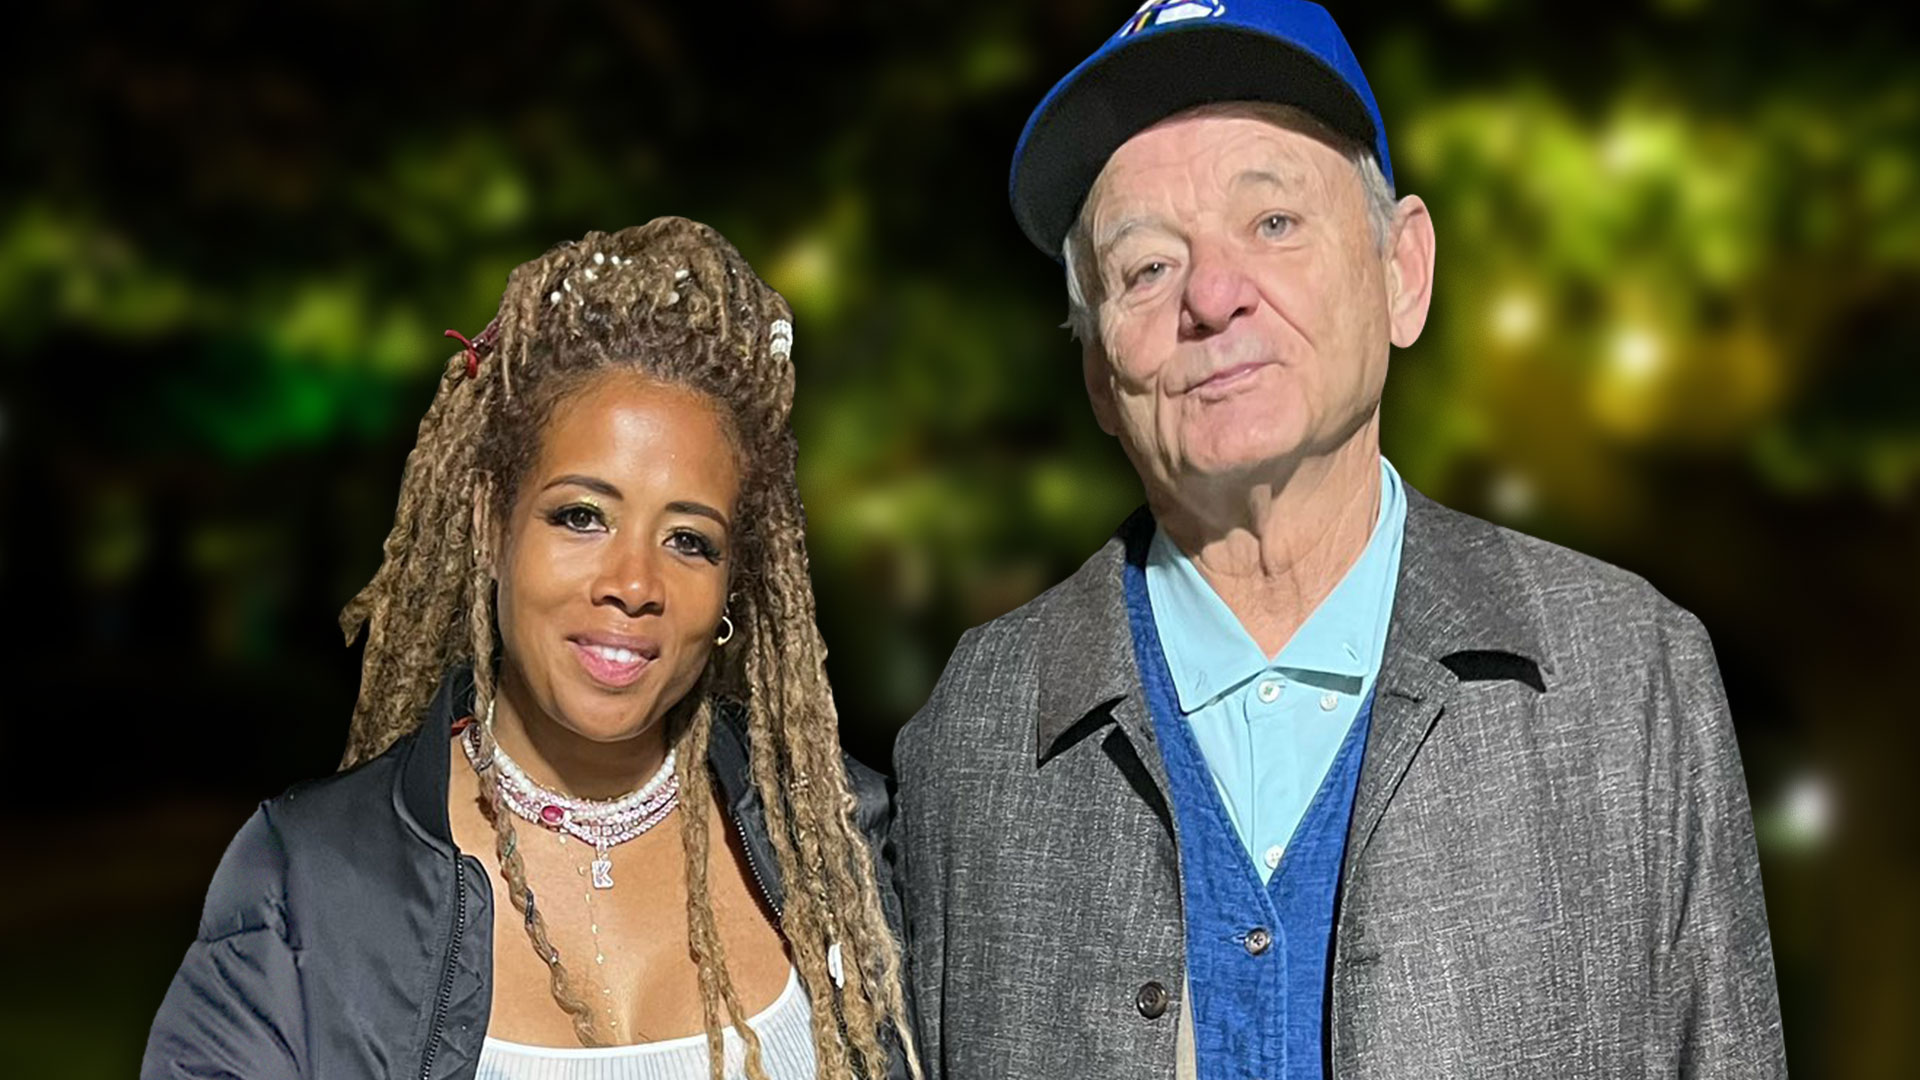 Bill Murray, 72, Dating Kelis, 43: An Unlikely Romance Sparks Up Between the Two! 14